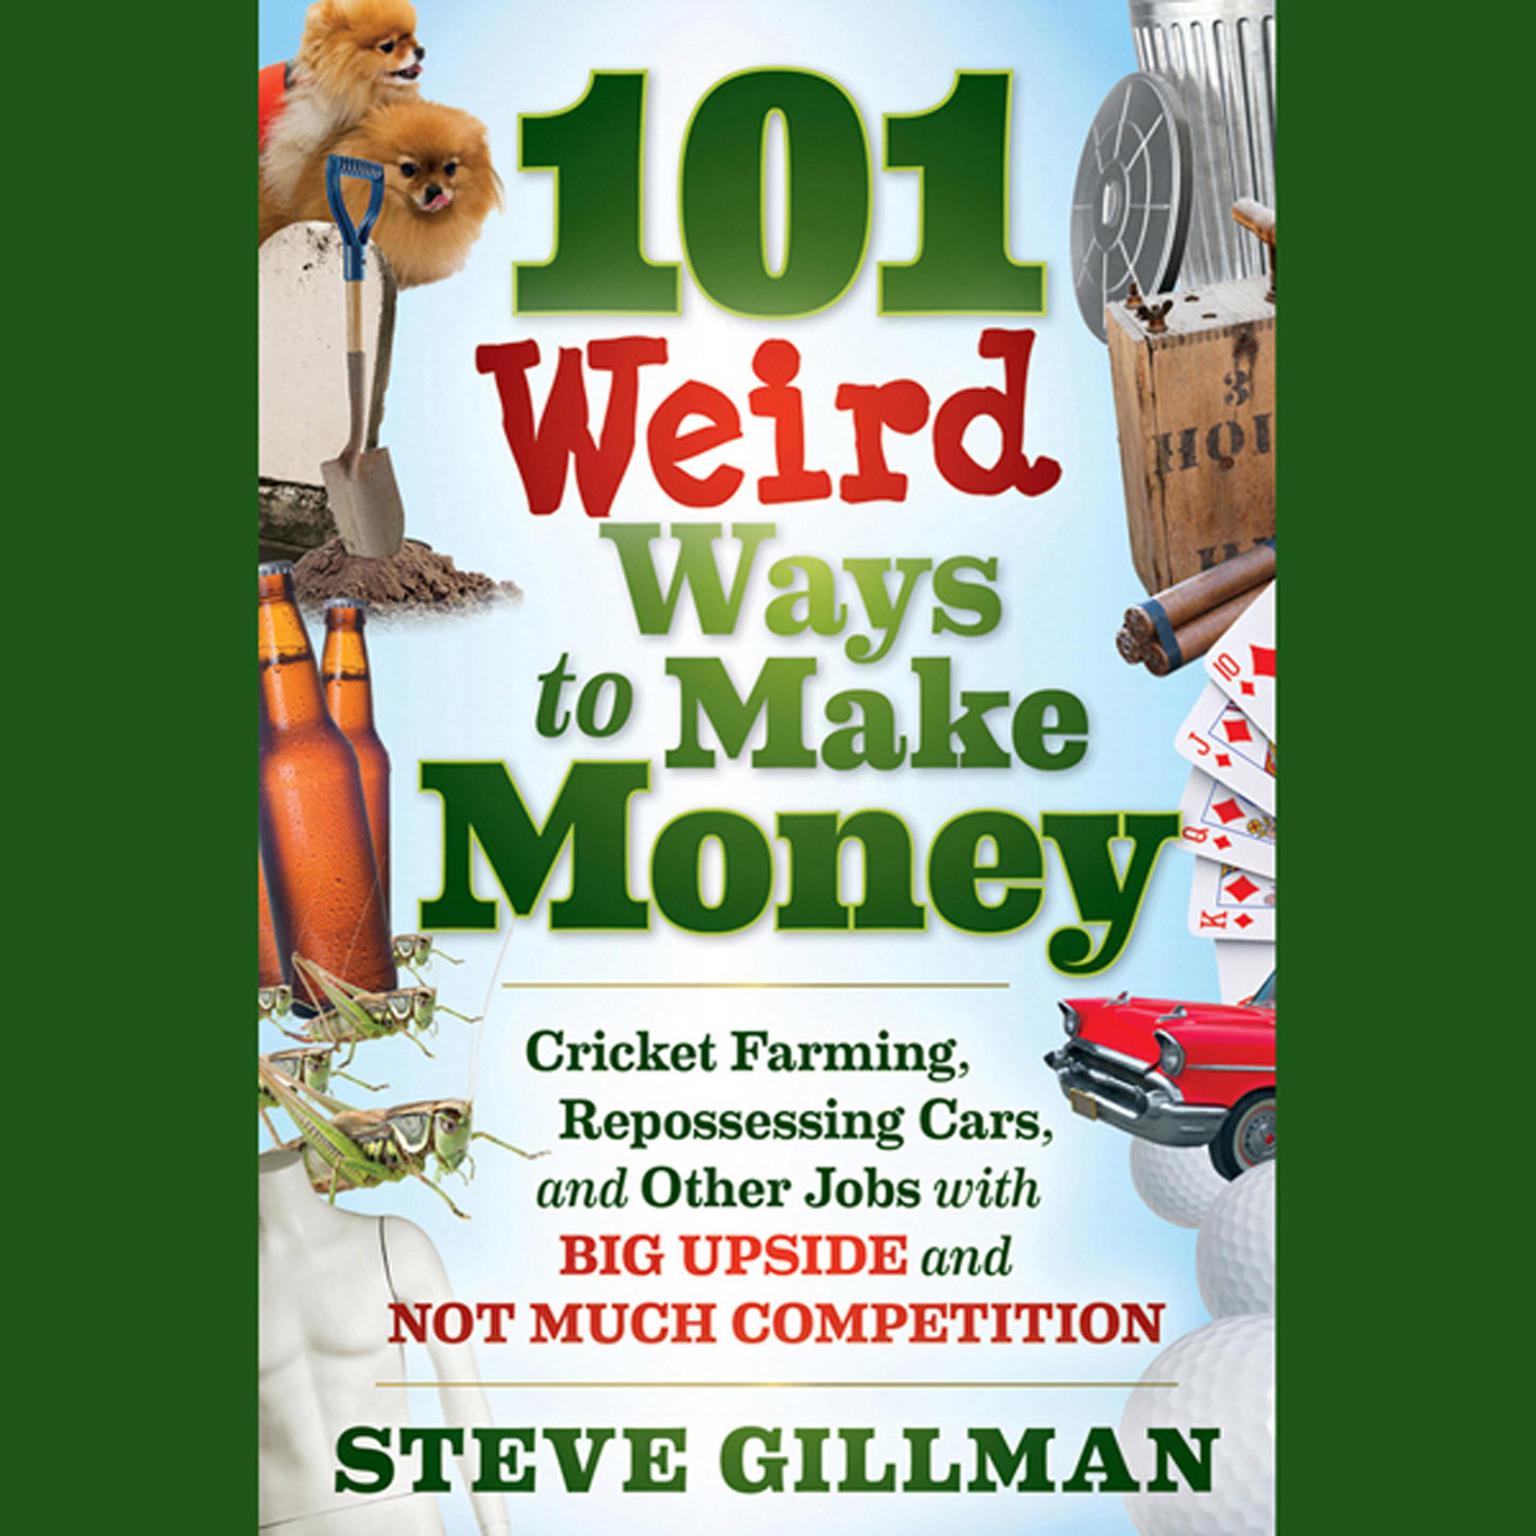 101 Weird Ways to Make Money: Cricket Farming, Repossessing Cars, and Other Jobs With Big Upside and Not Much Competition Audiobook, by Steve Gillman